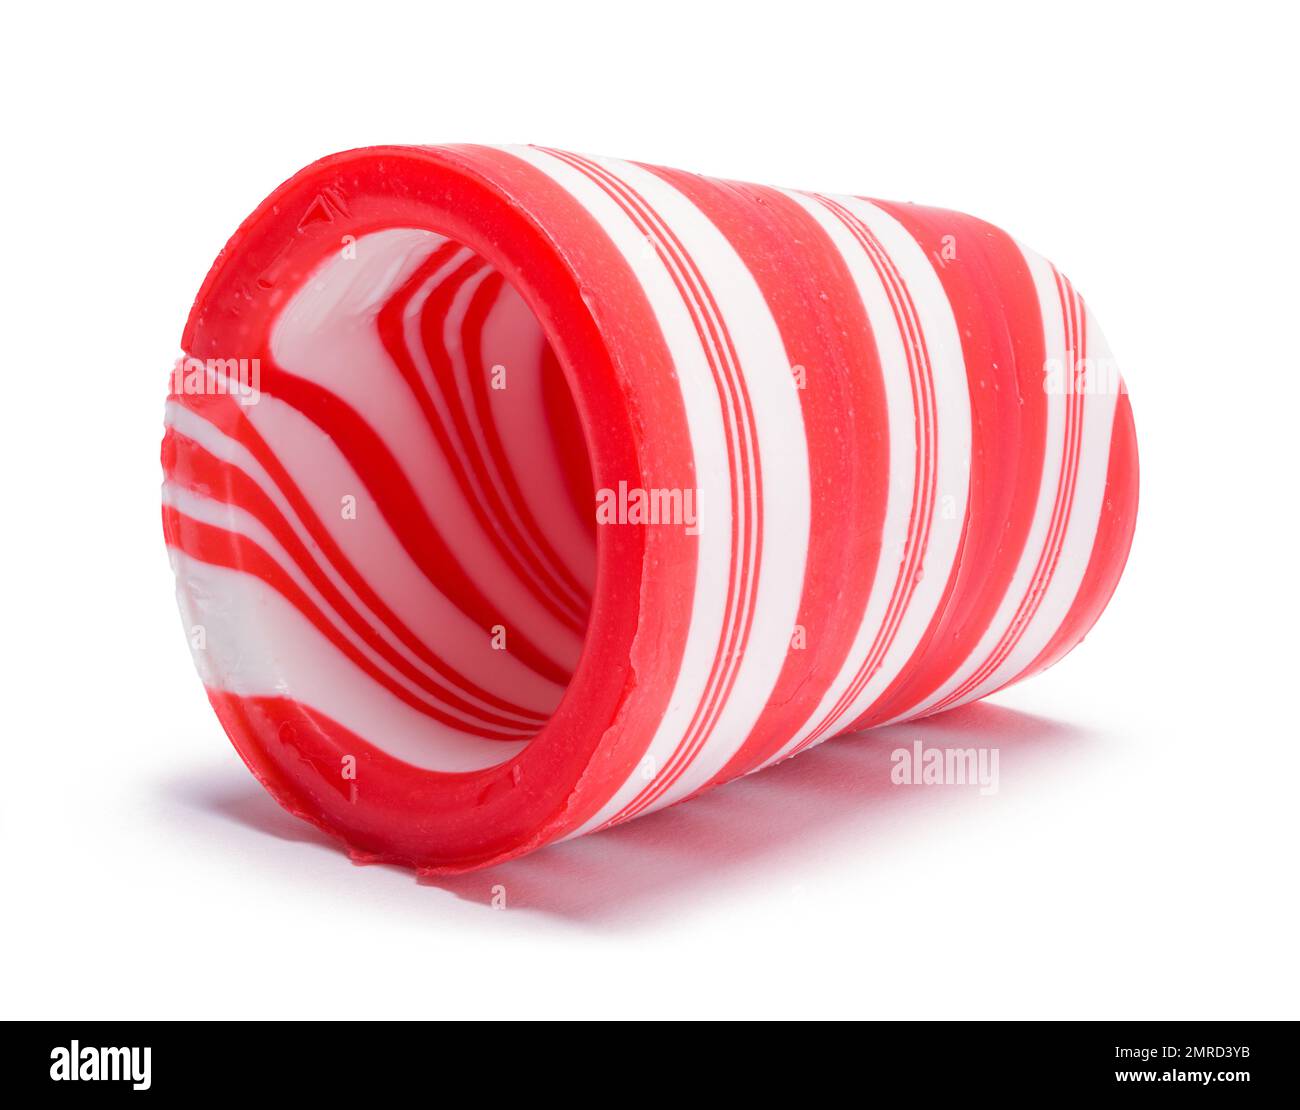 Peppermint Candy Cane Roll Cut Out on White. Stock Photo